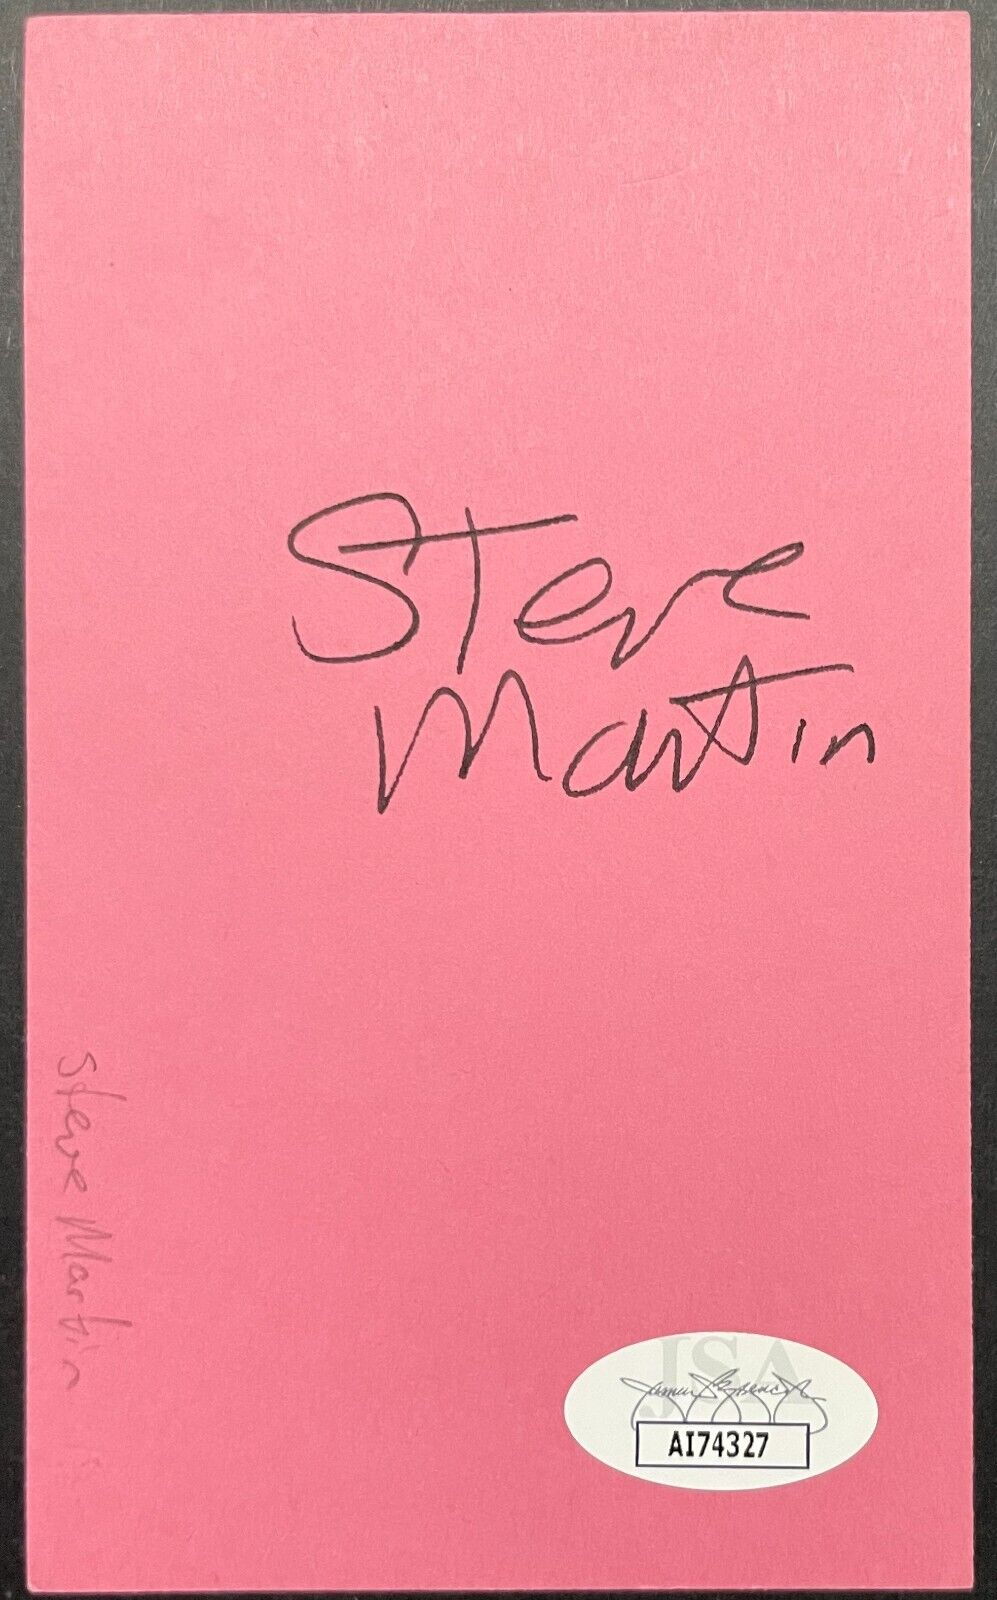 Steve Martin Autographed Signed Index Card JSA Authenticated Actor Comedian